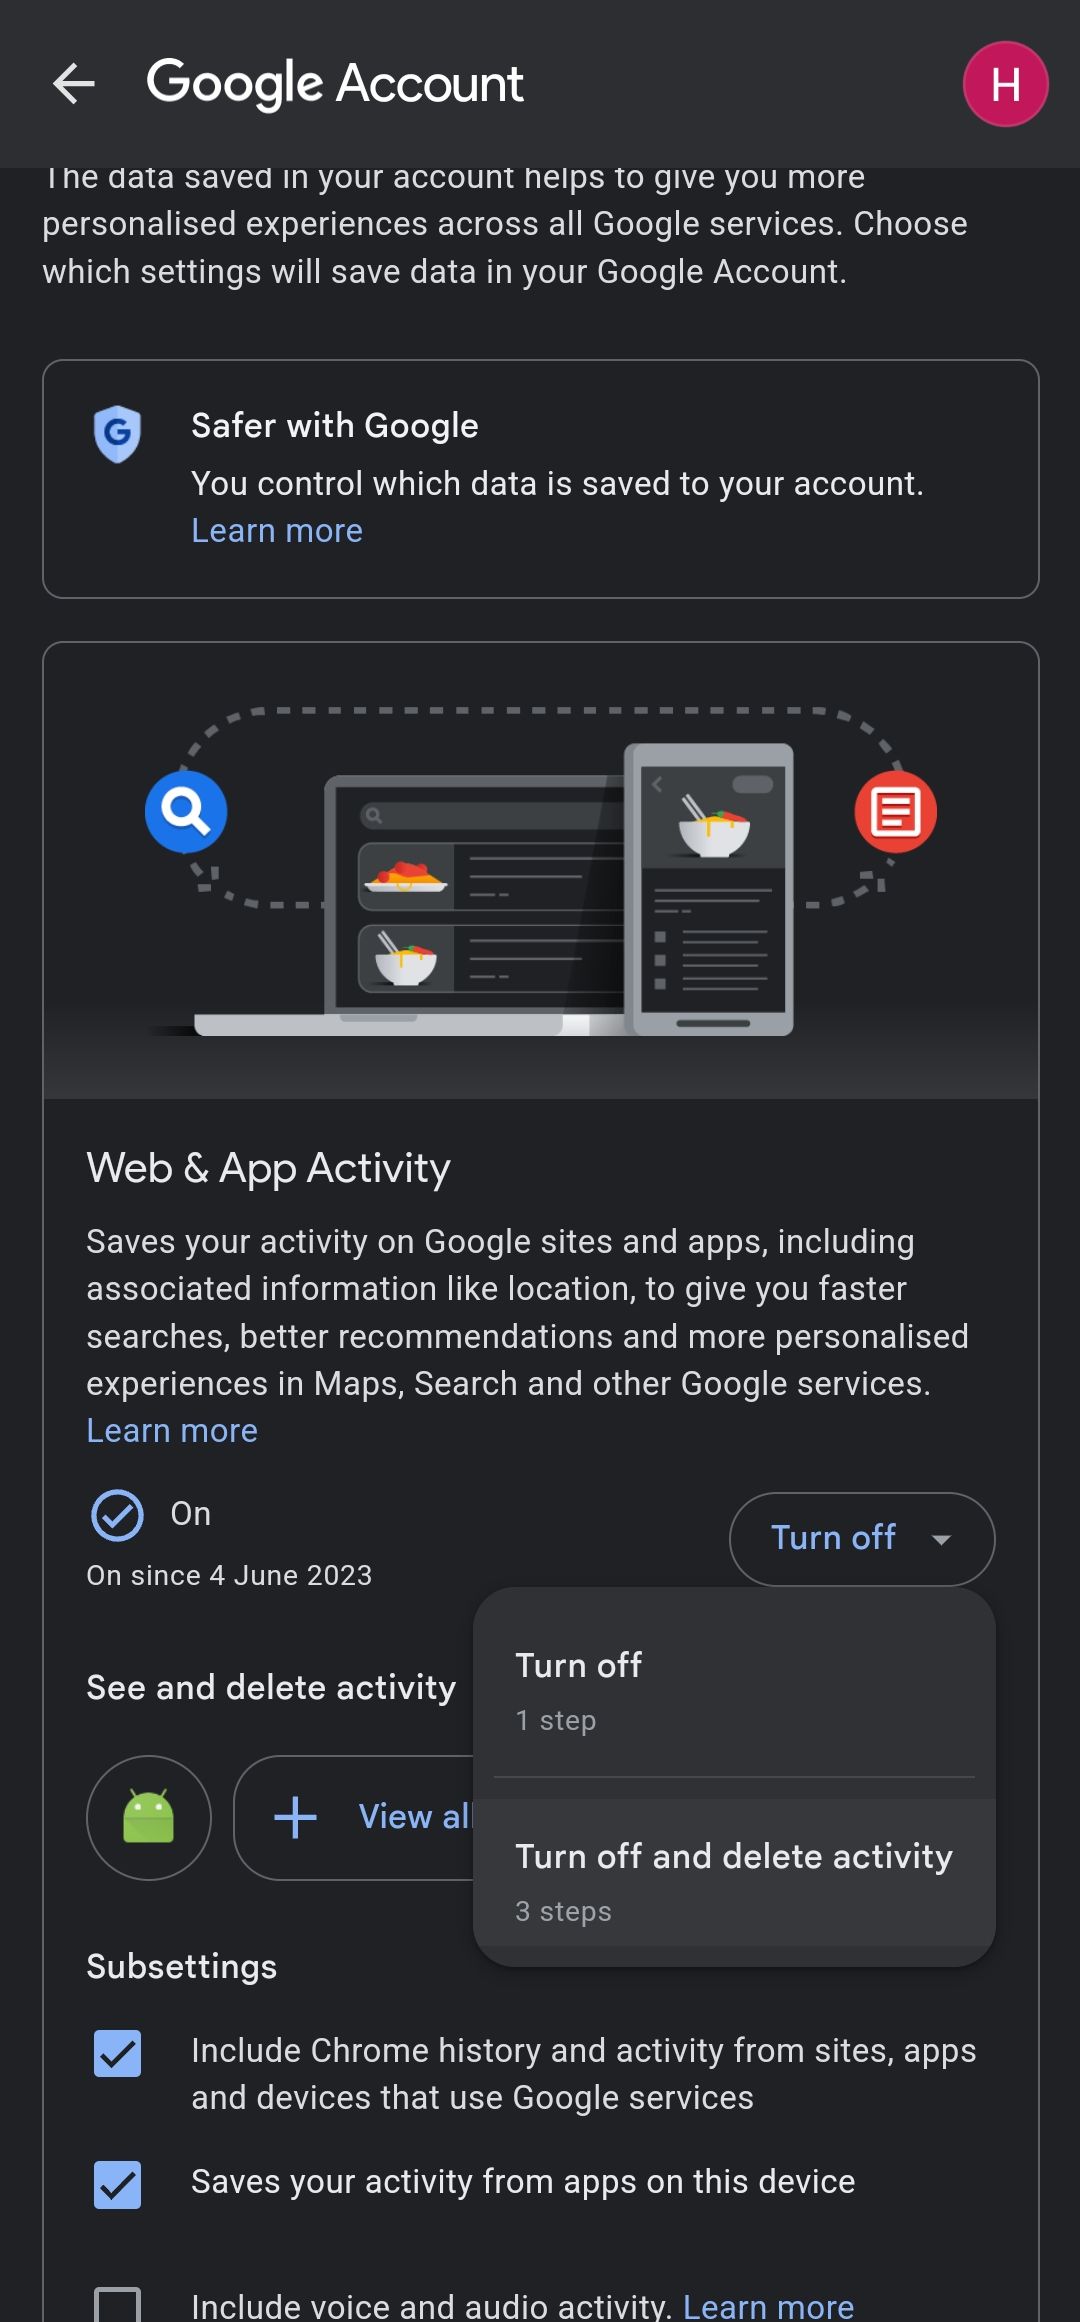 Turning off and deleting Web & App Activity